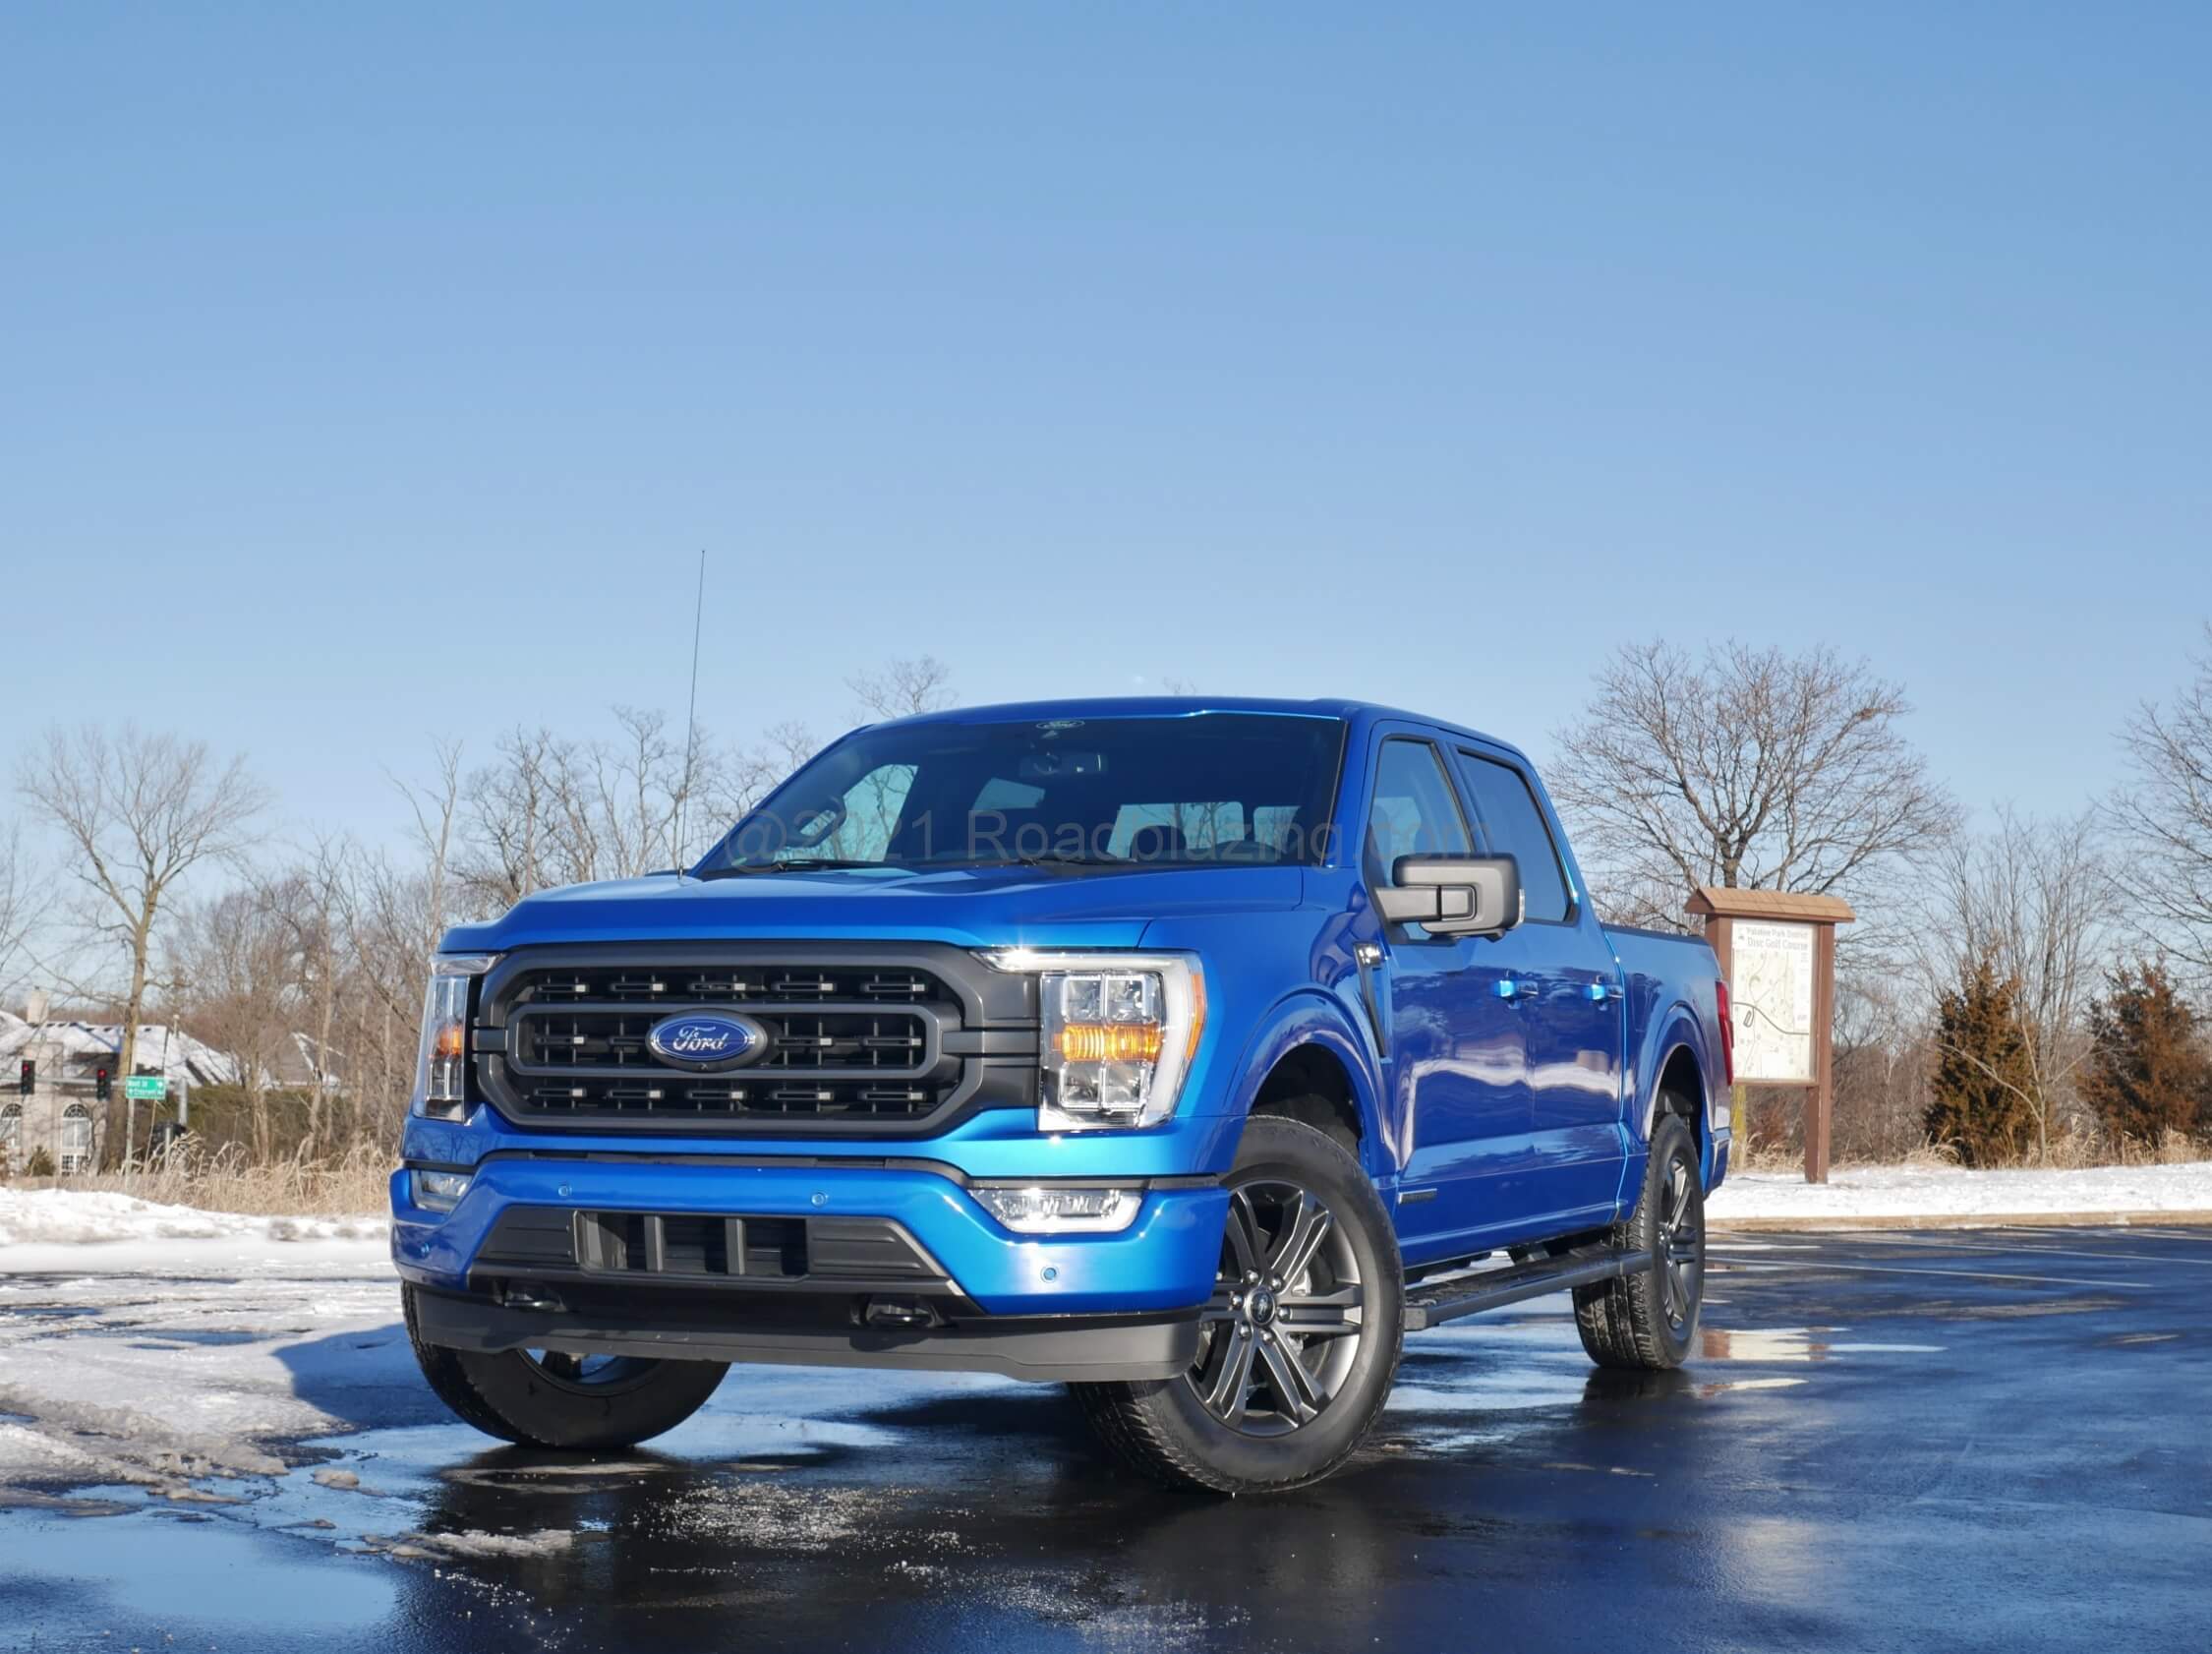 2021 Ford F-150 Supercrew XLT 4x4 PowerBoost hybrid: visible athleticism increases with wider, taller grille bezel, taller hood power dome, body color matching lower chin